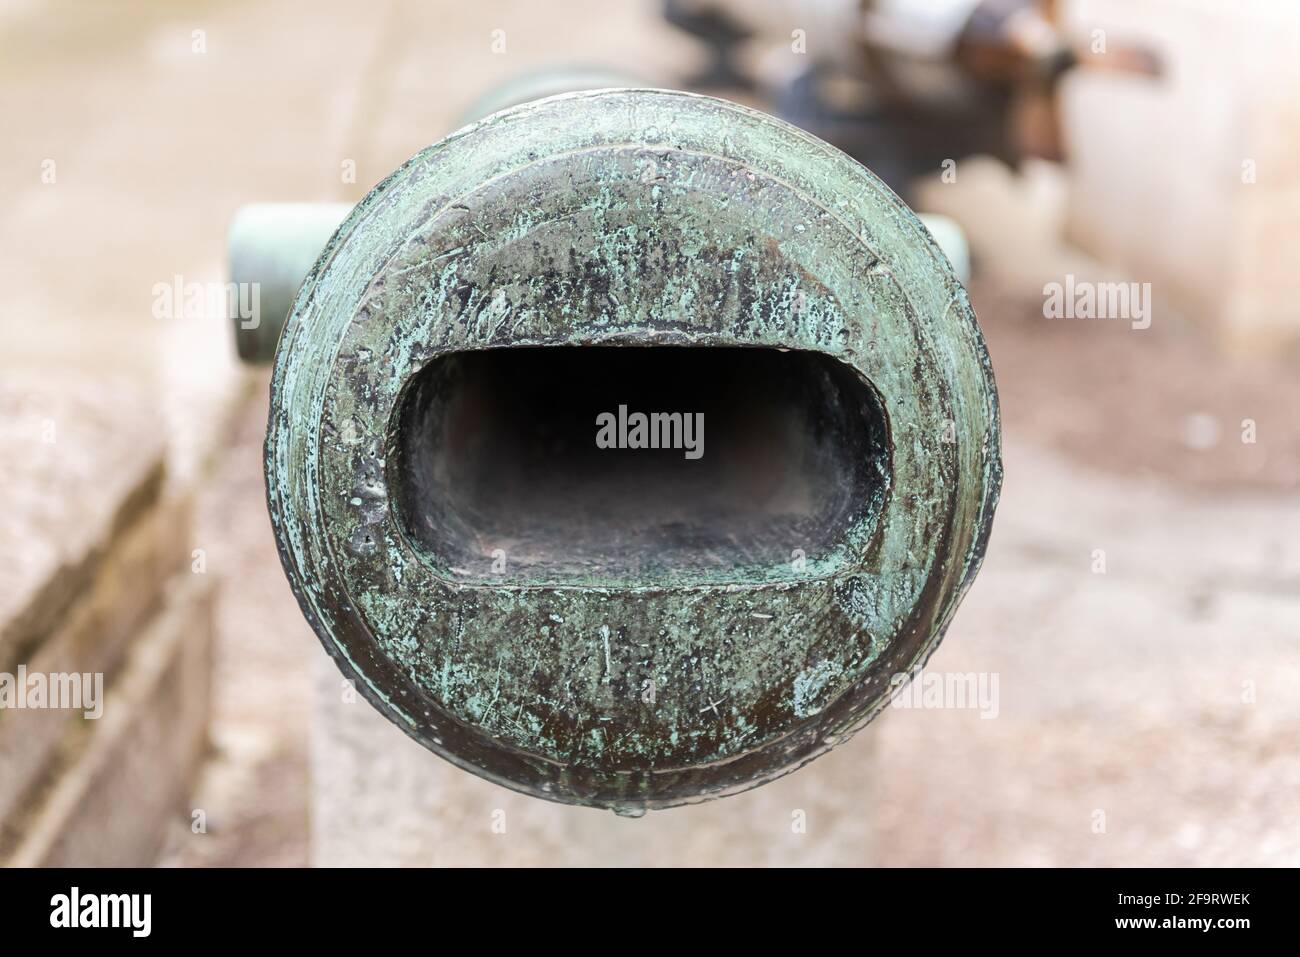 An old ship's cannon. The secret howitzer of the Shuvalov system of the 18th century. One of the developments of the engineers of the Russian Empire. Stock Photo